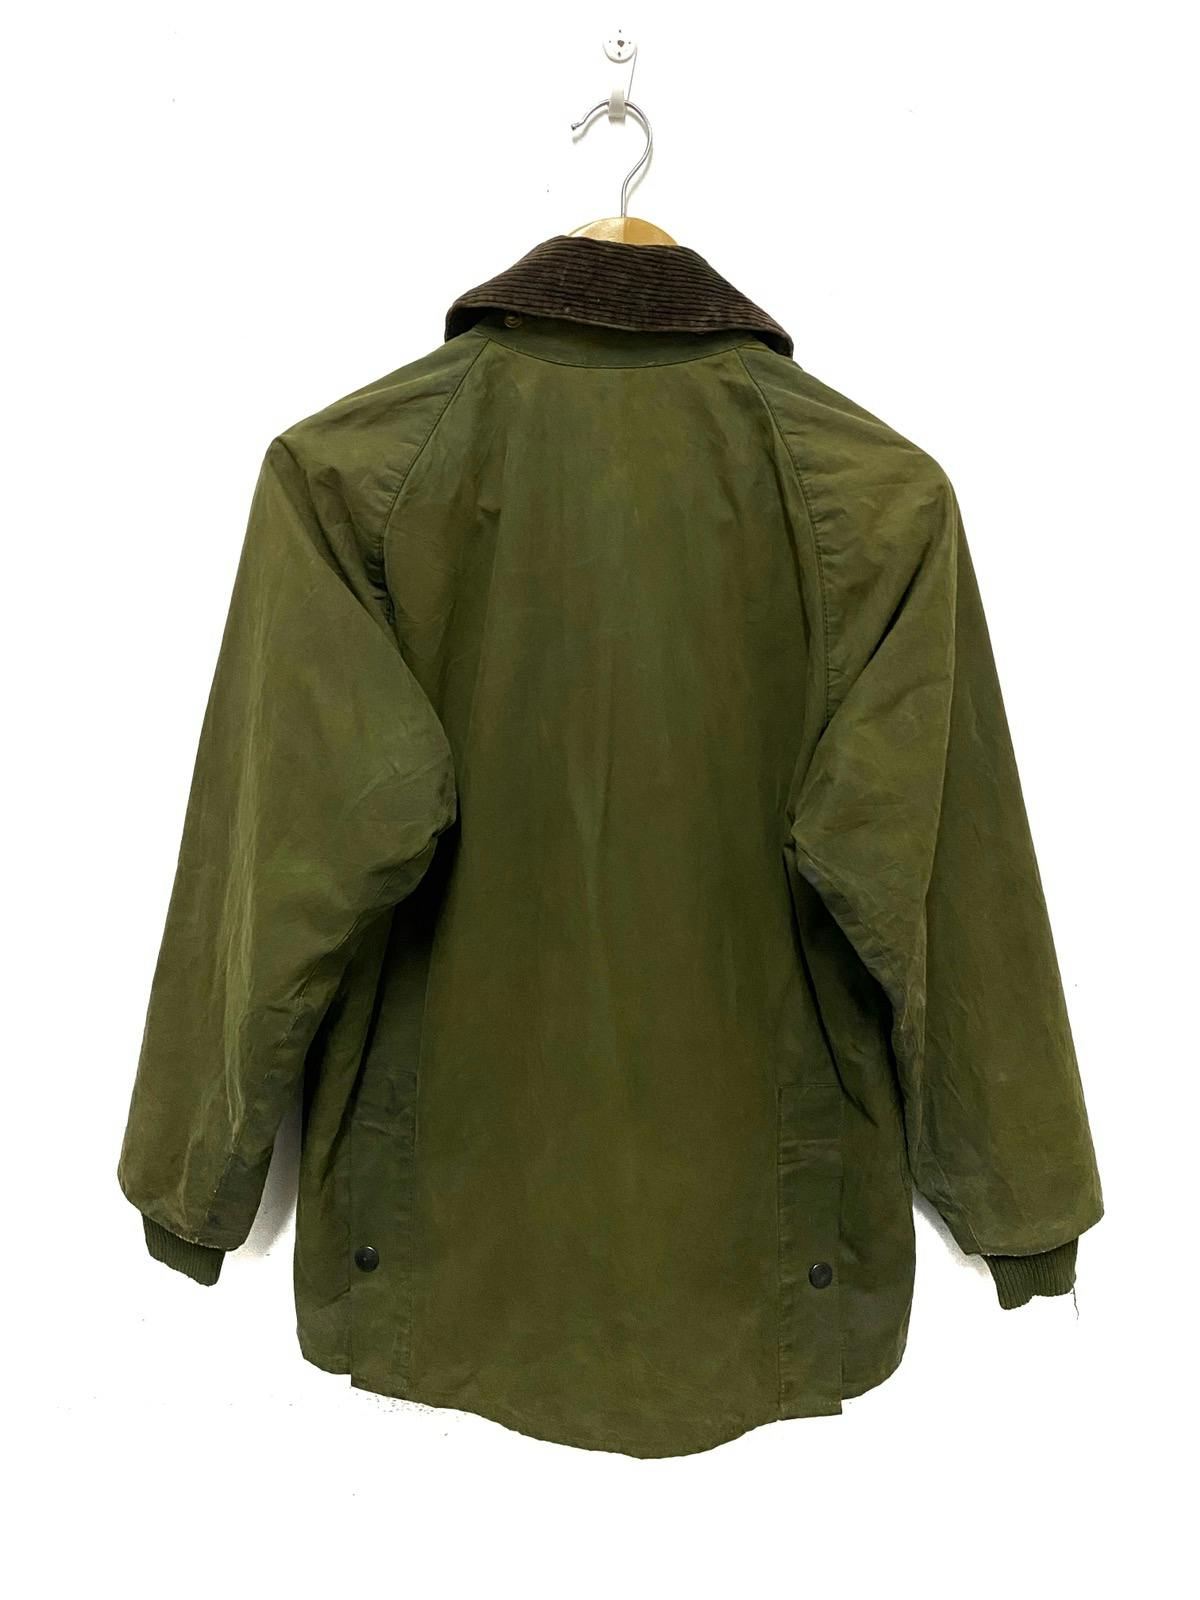 Barbour Bedale A100 Wax Jacket Made in England - 7